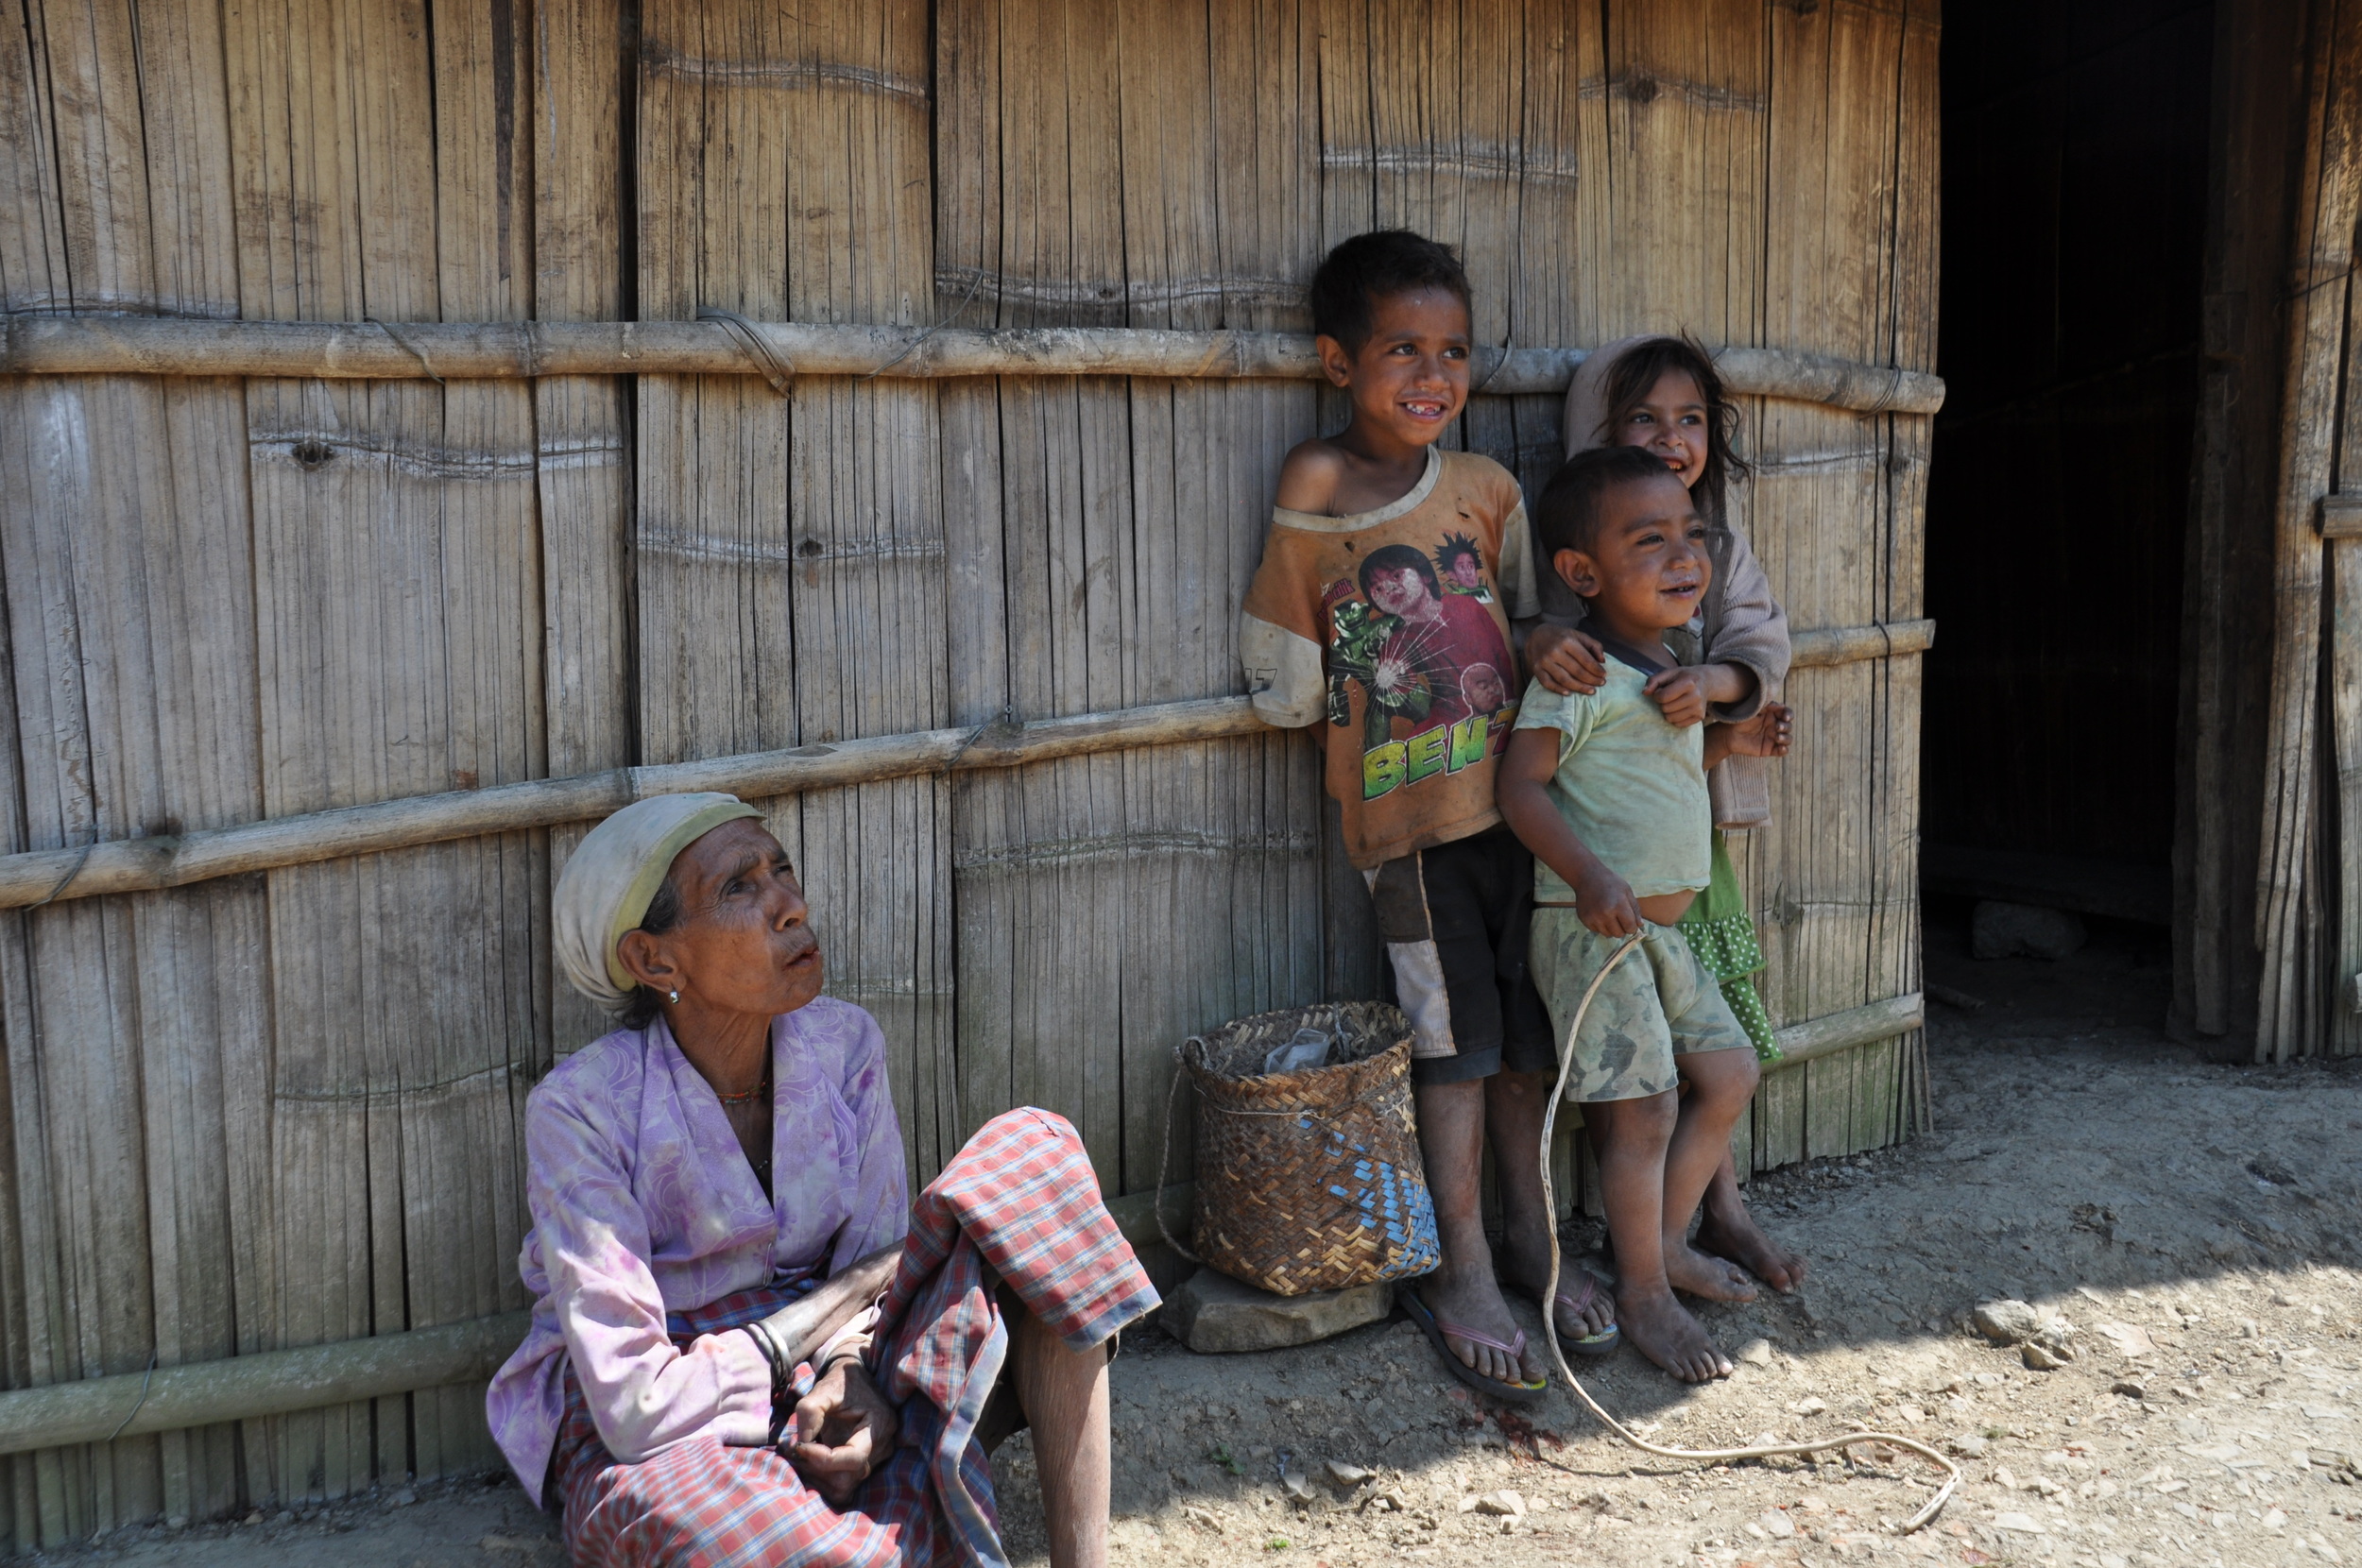 Children in the remote areas of Timor-Leste mostly come from poor farming communities with little access to education or health services